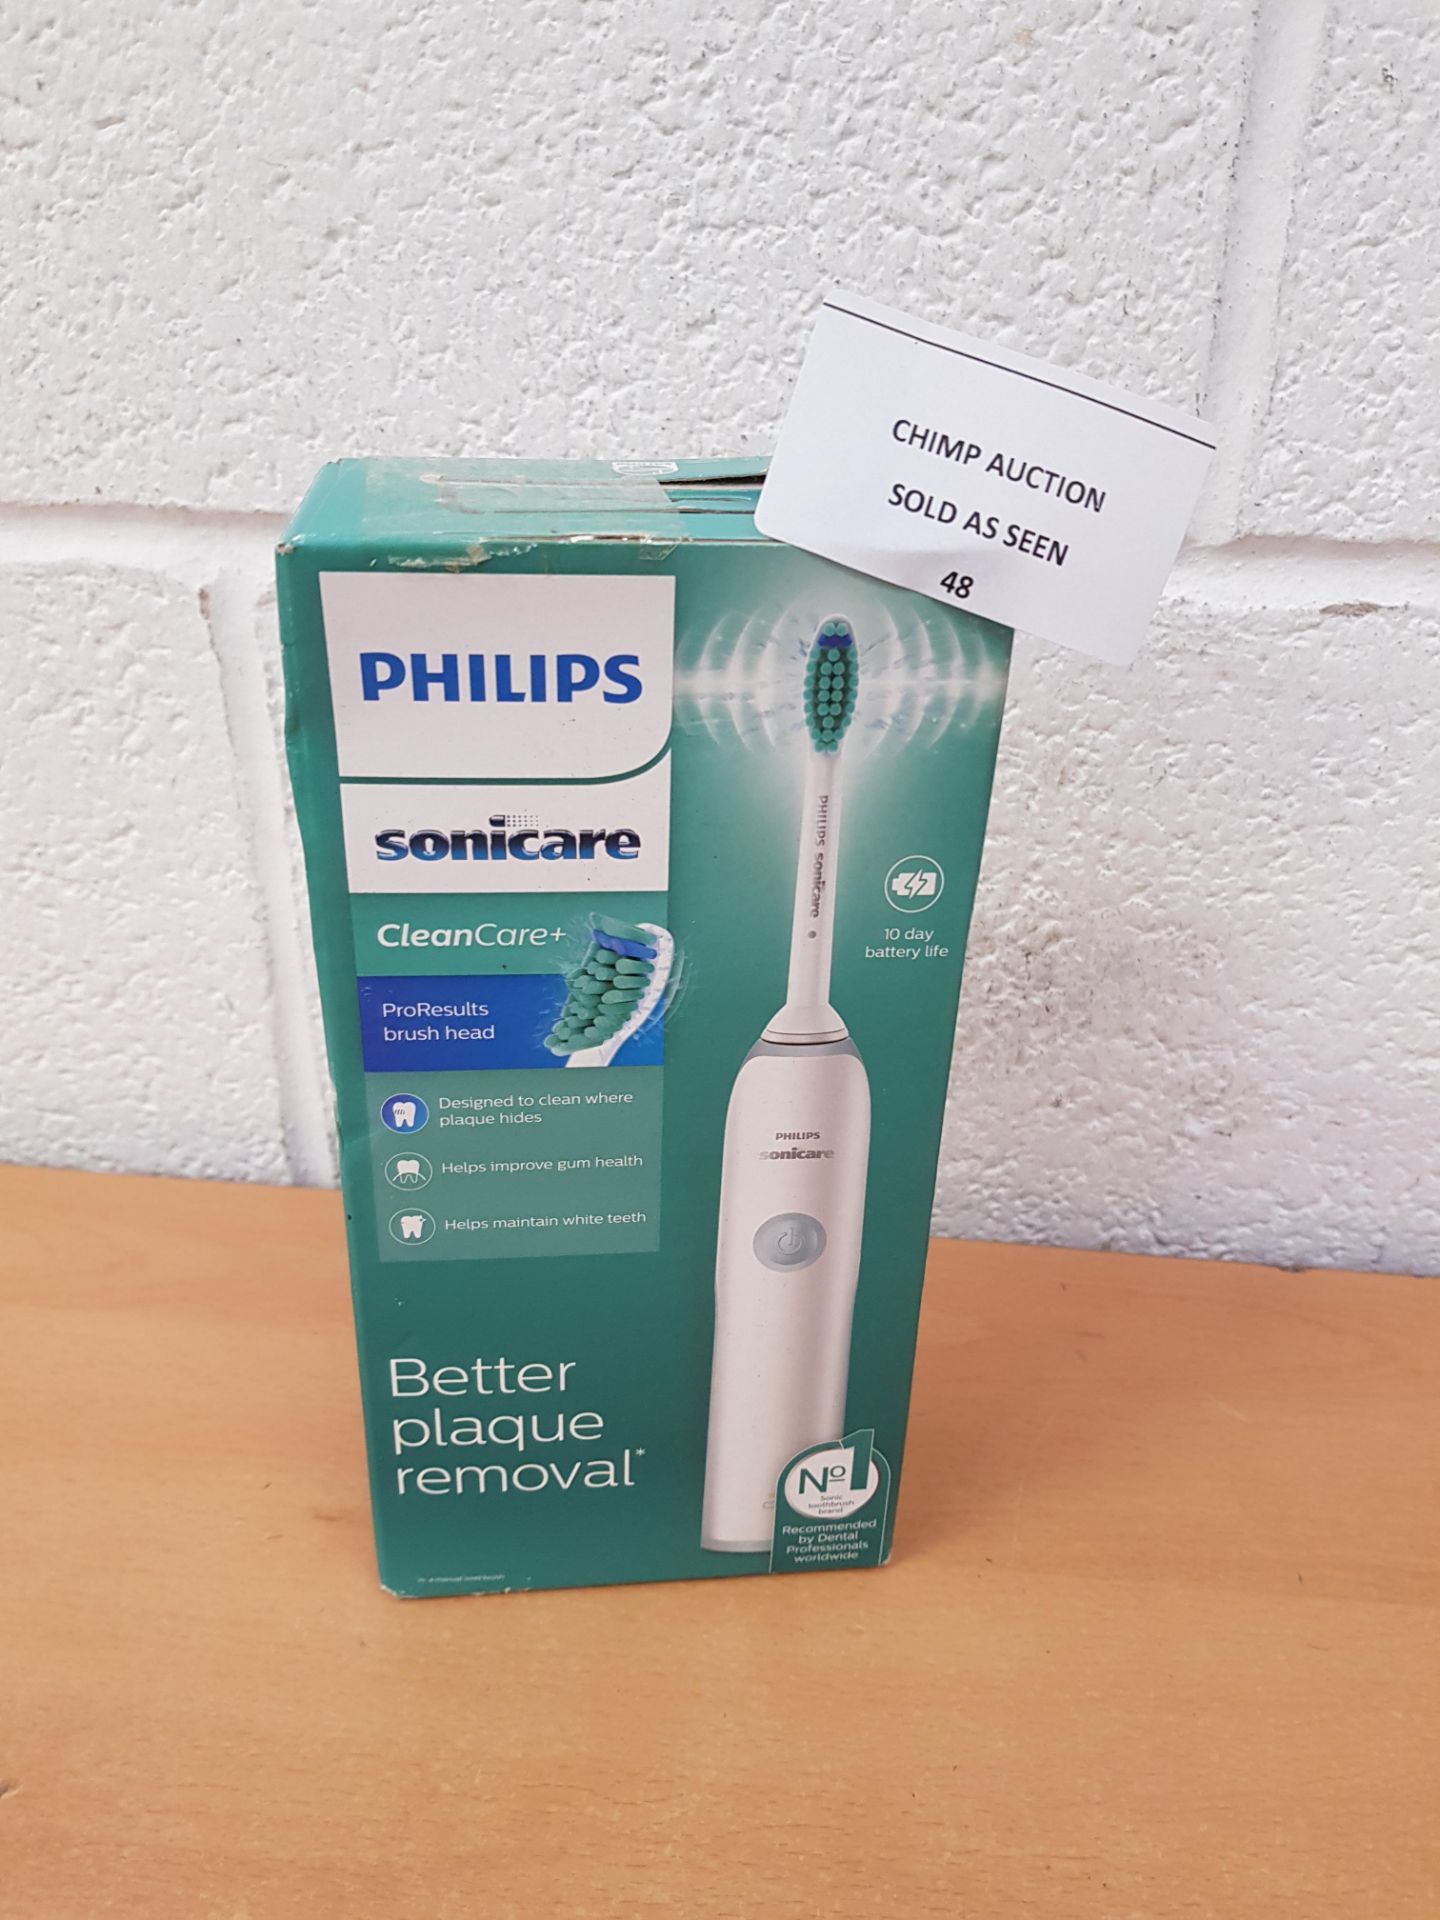 Philips Sonicare CleanCare+ Electric Toothbrush - HX3214/01